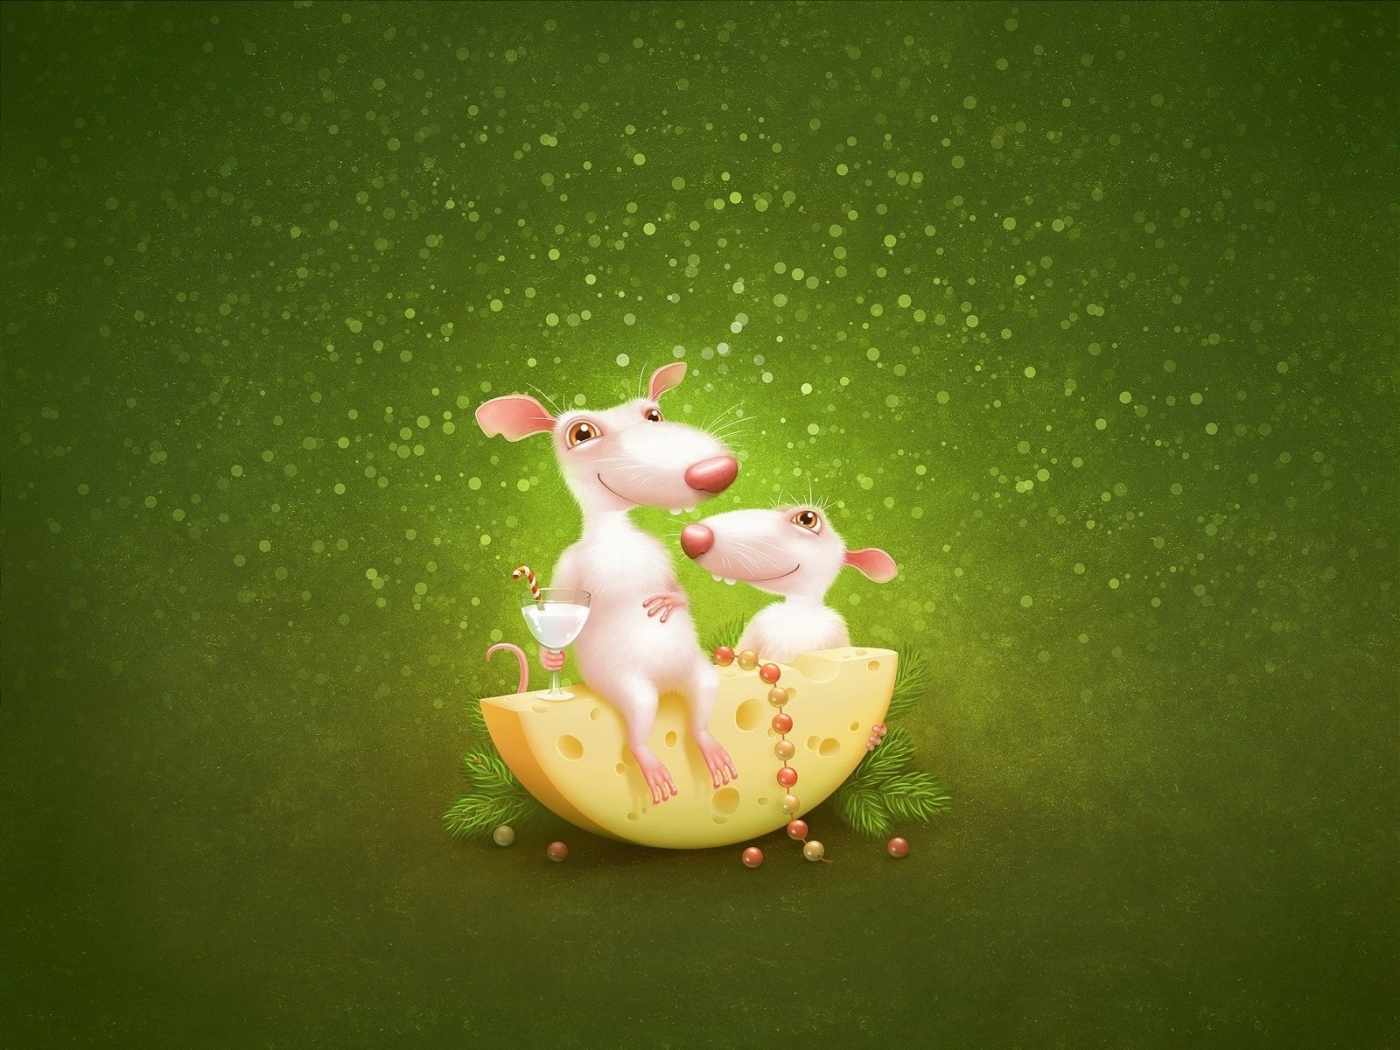 mice, pictures, green